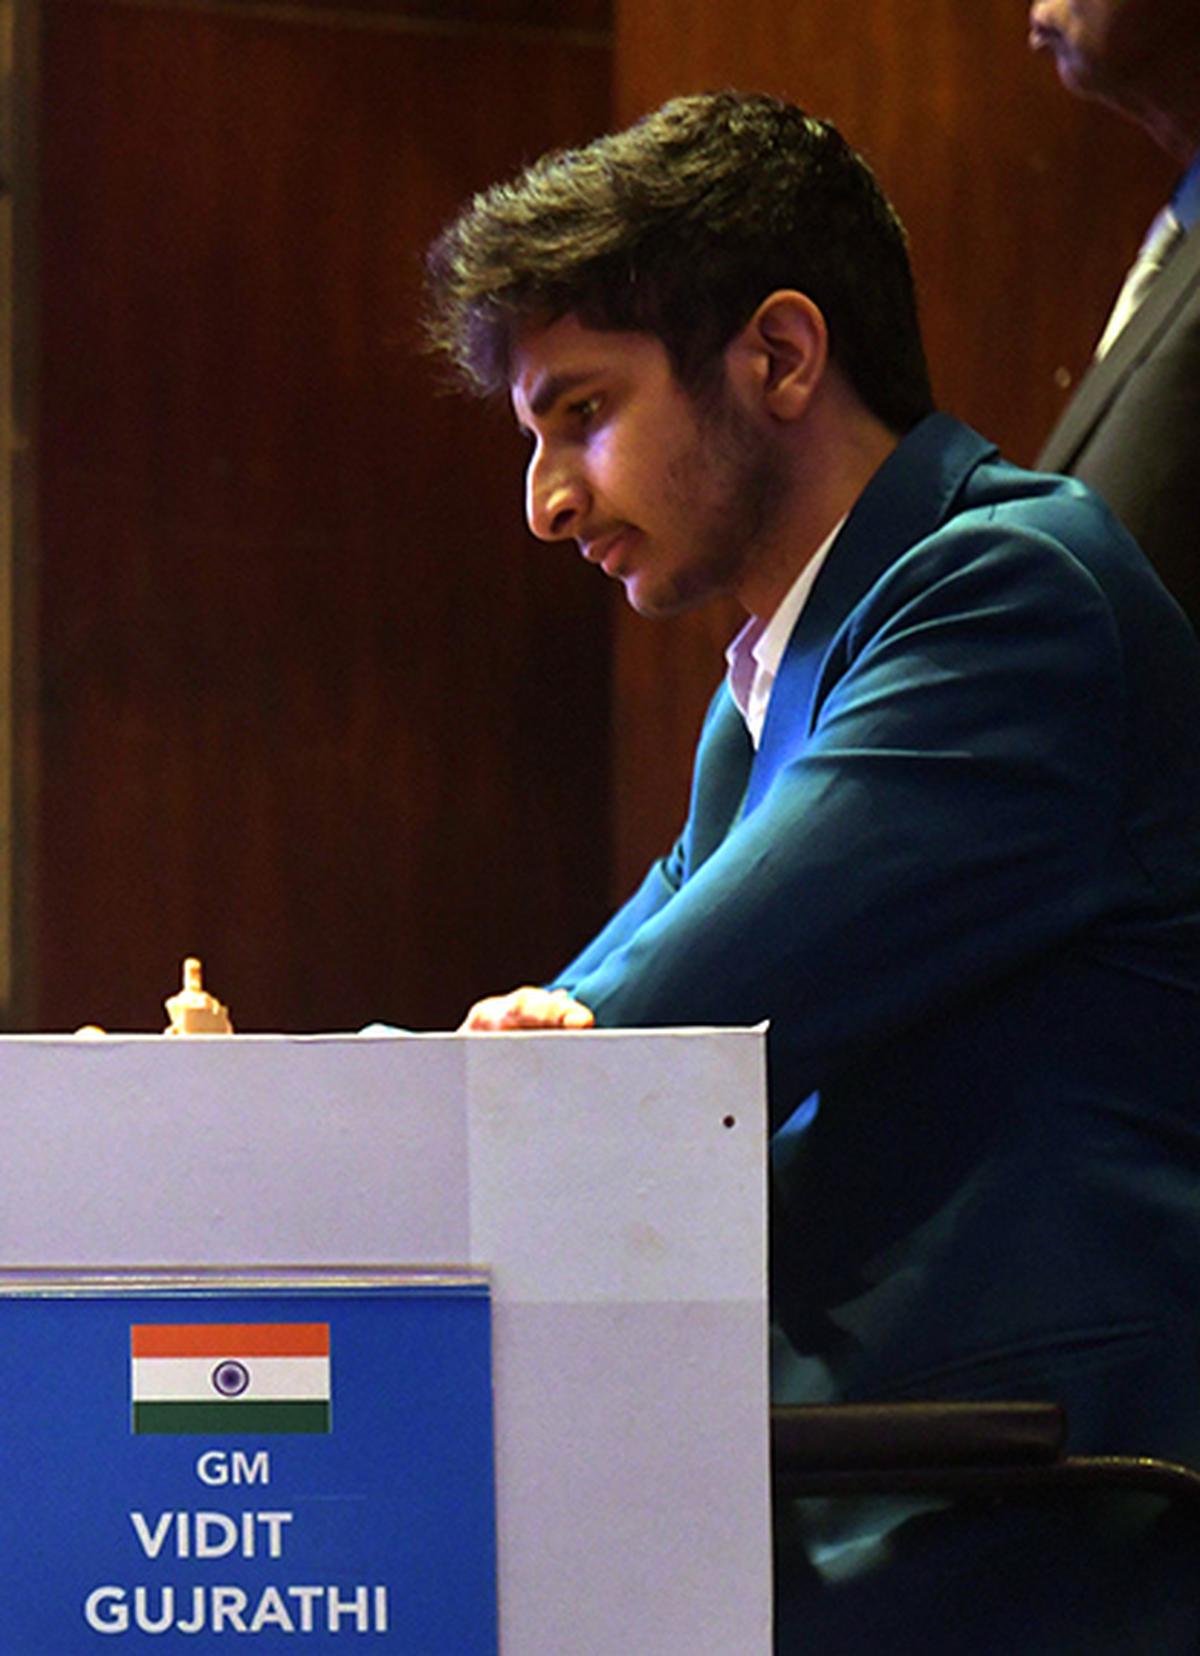 Chess Olympiad 2022: Indian player profiles in men's category, Elo ratings  and records - Sportstar